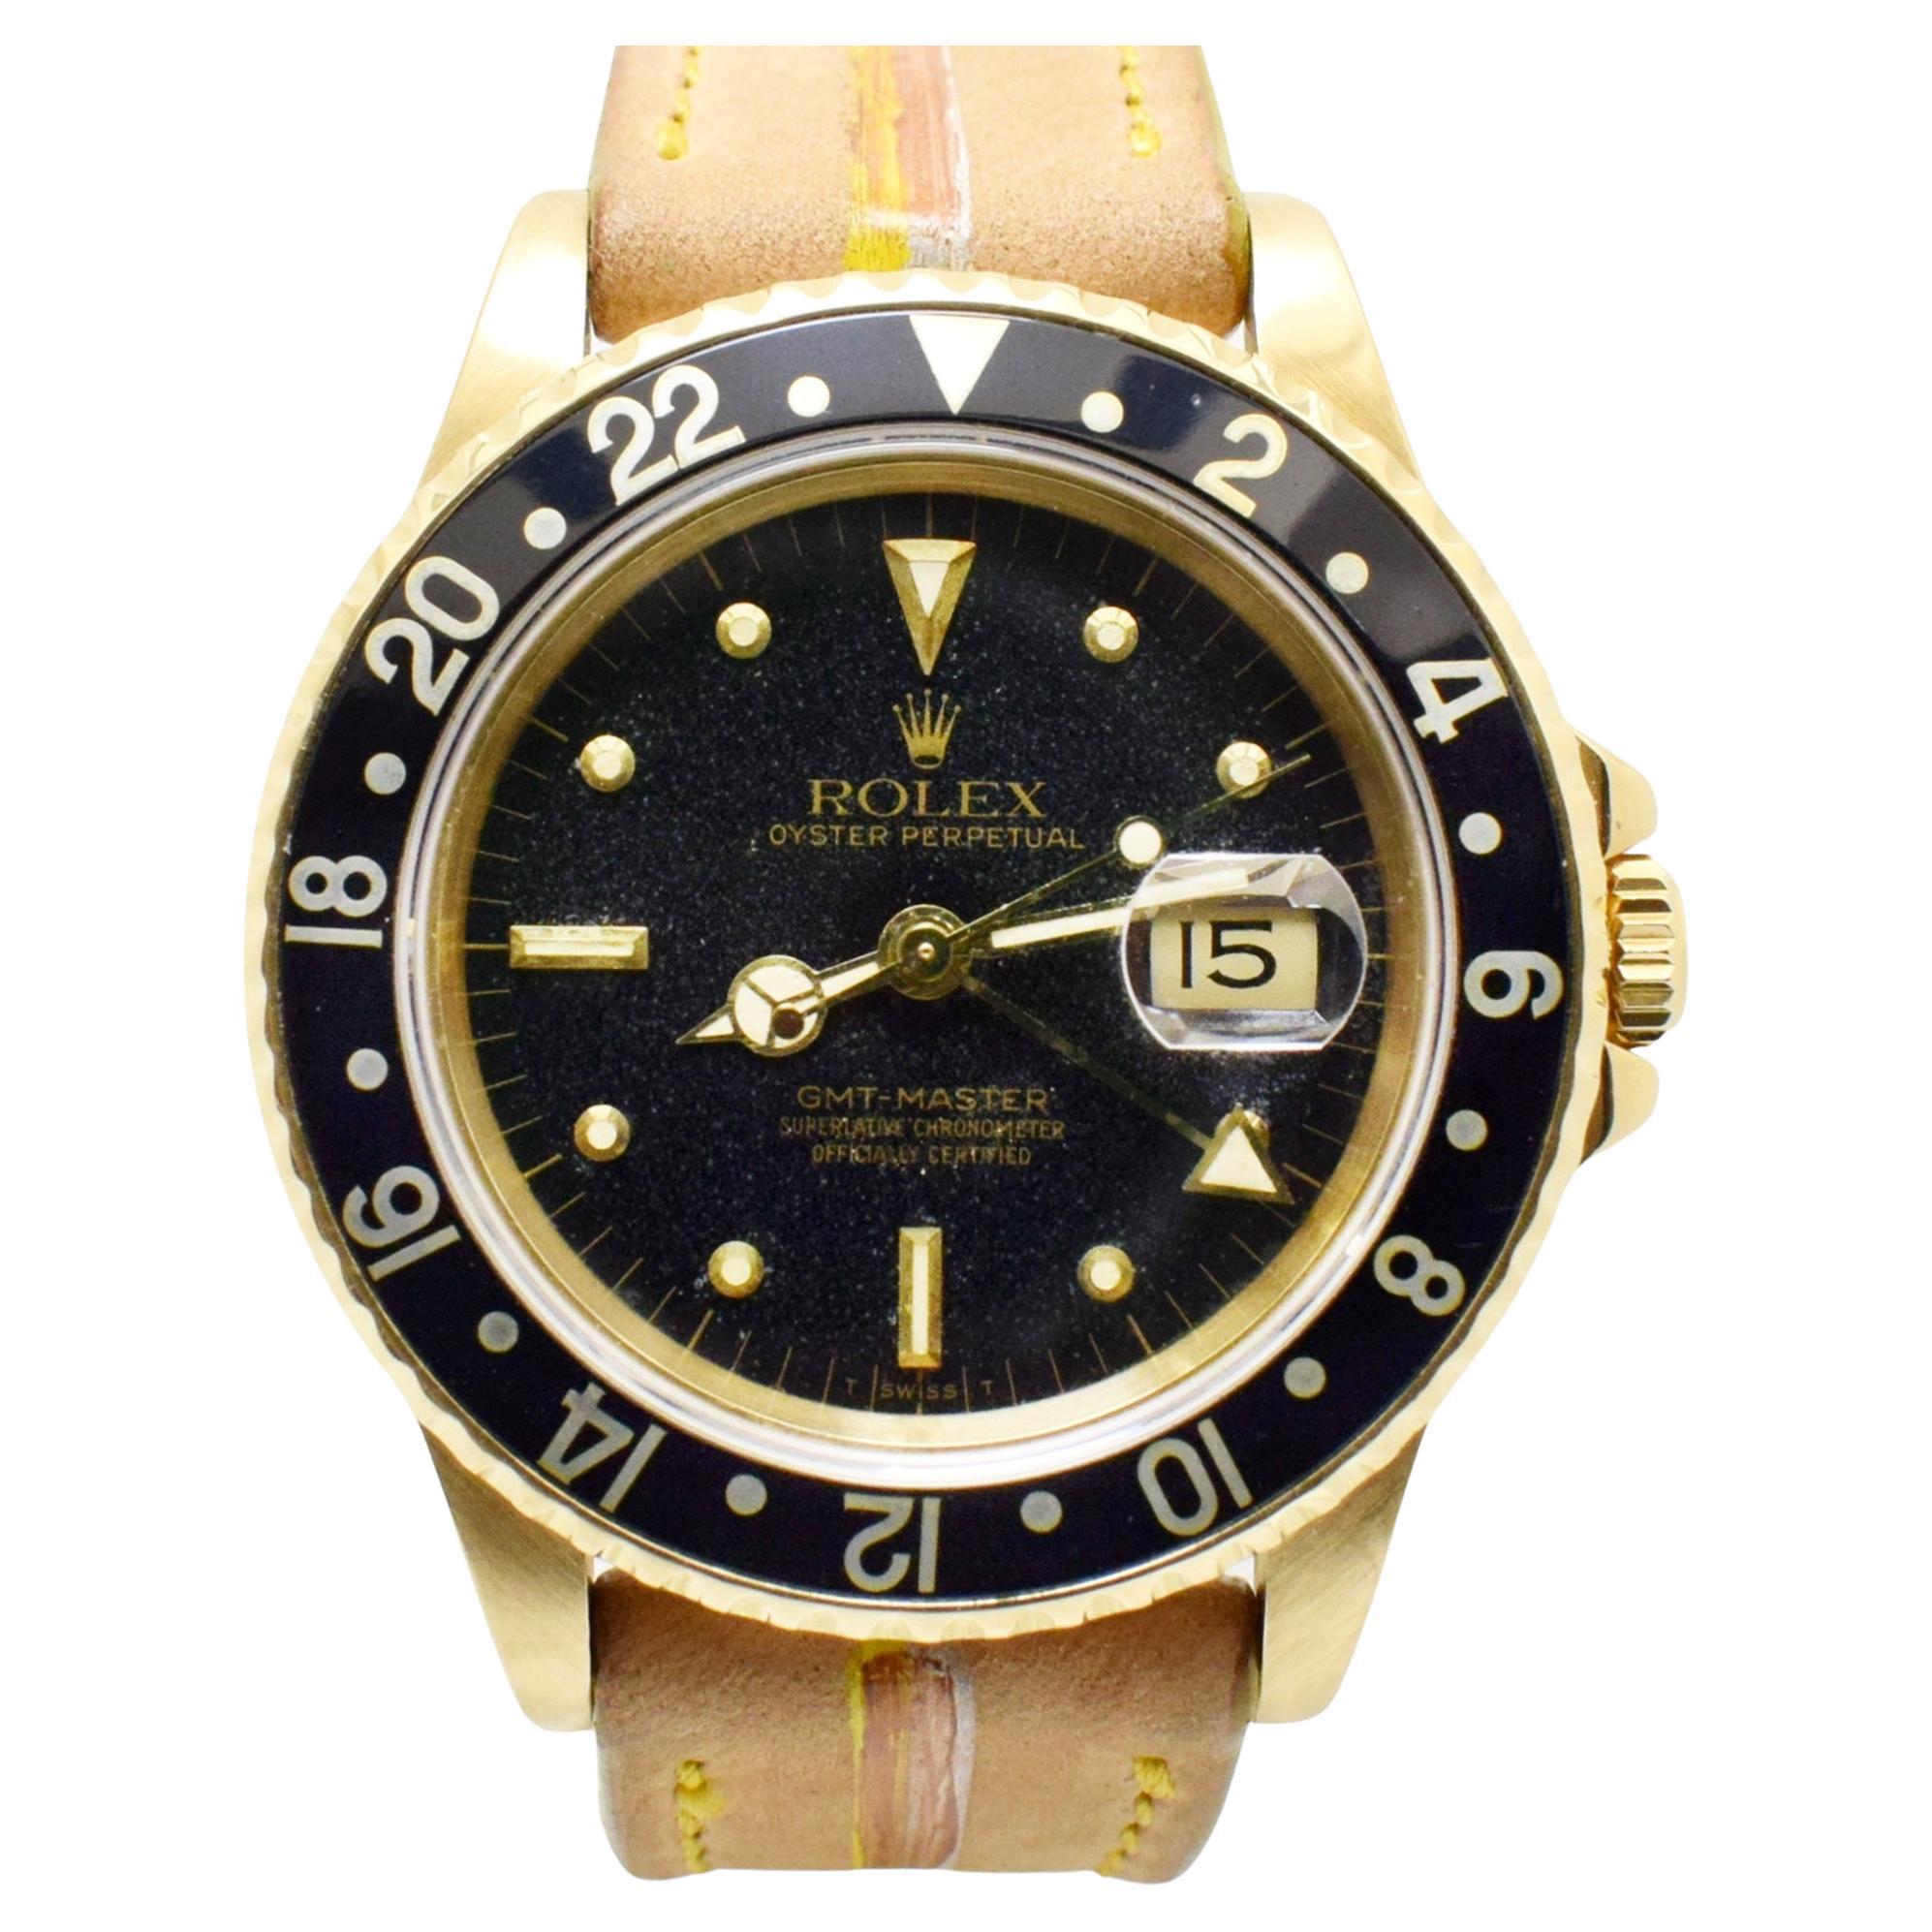 Rolex GMT-Master 18K Yellow Gold Black Nipple Dial 16758 Automatic Watch 1983